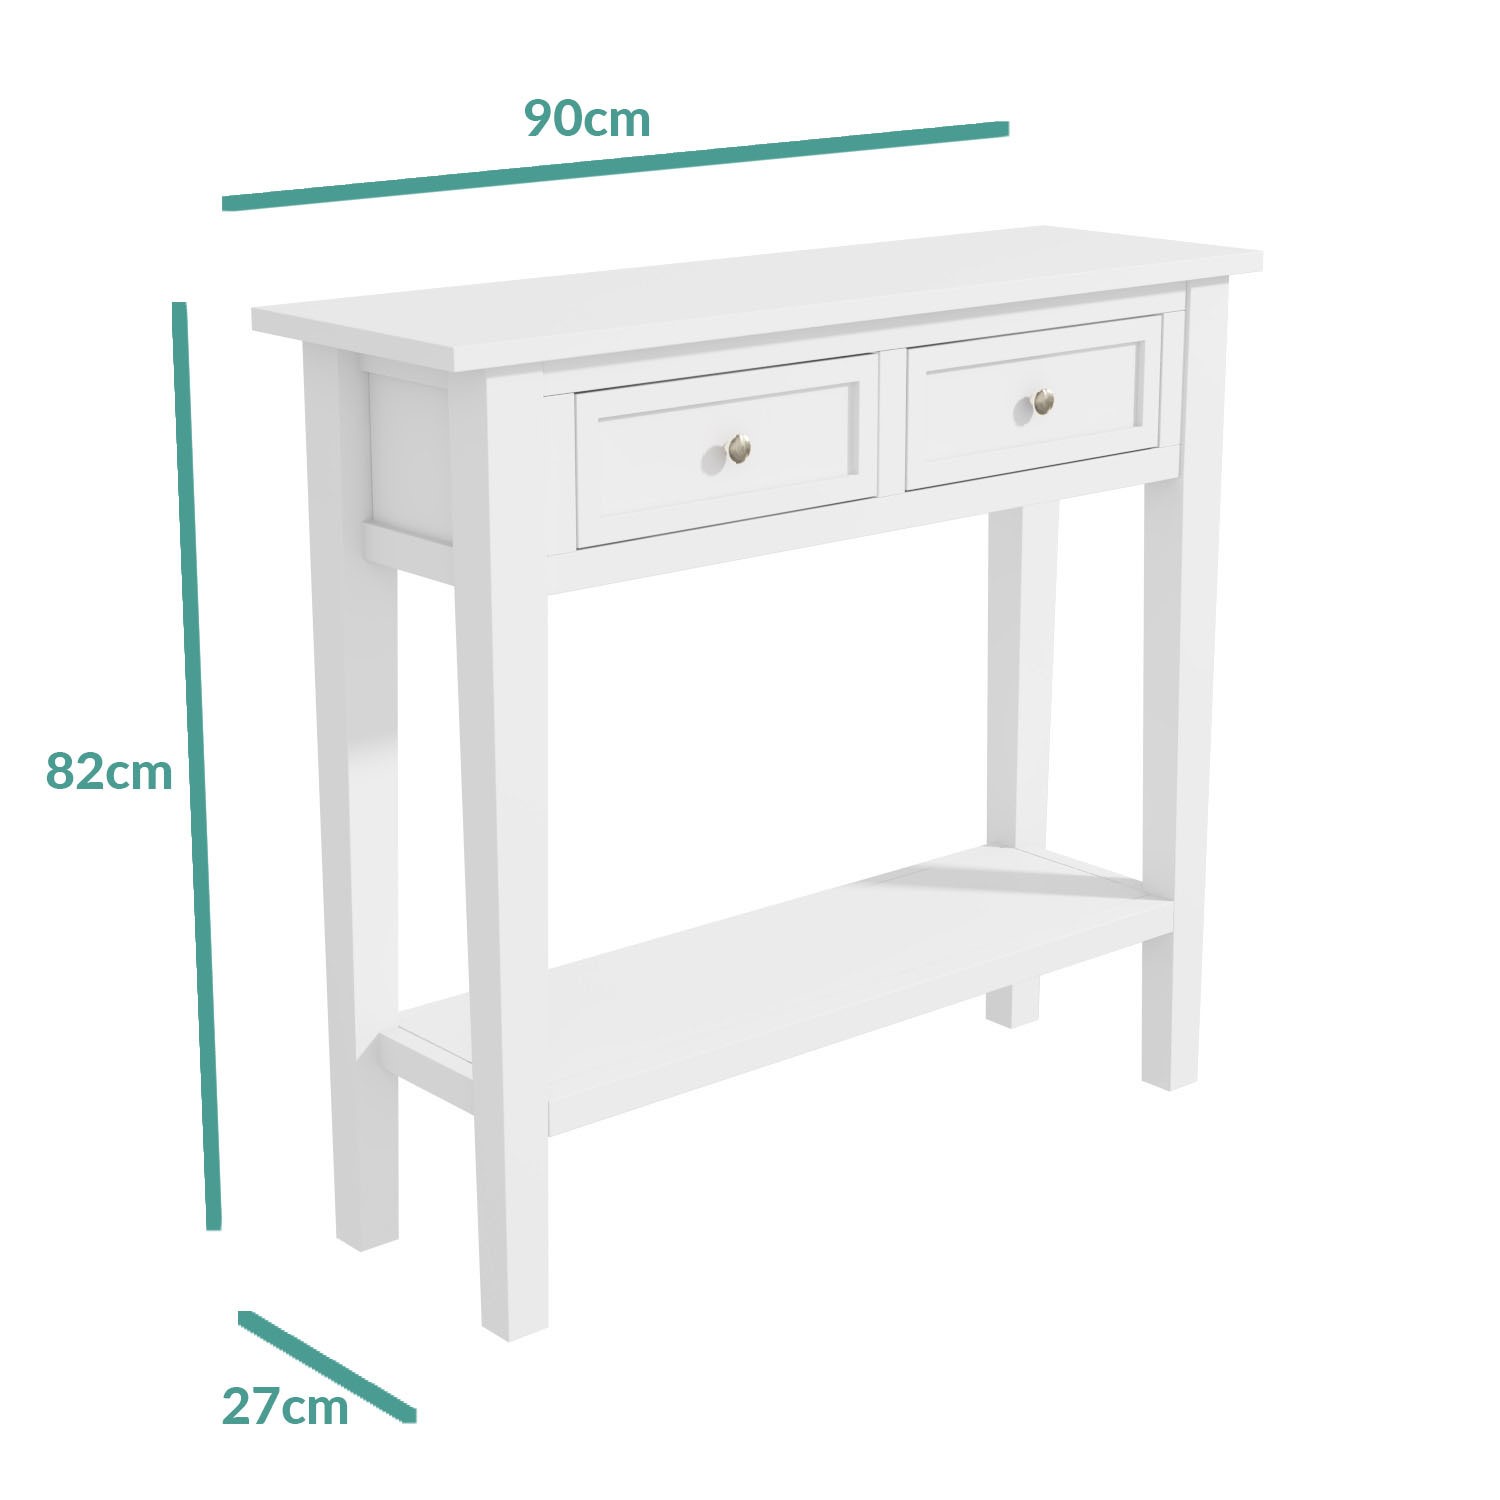 Narrow Console Table With Drawers In, Narrow Console Cabinet White